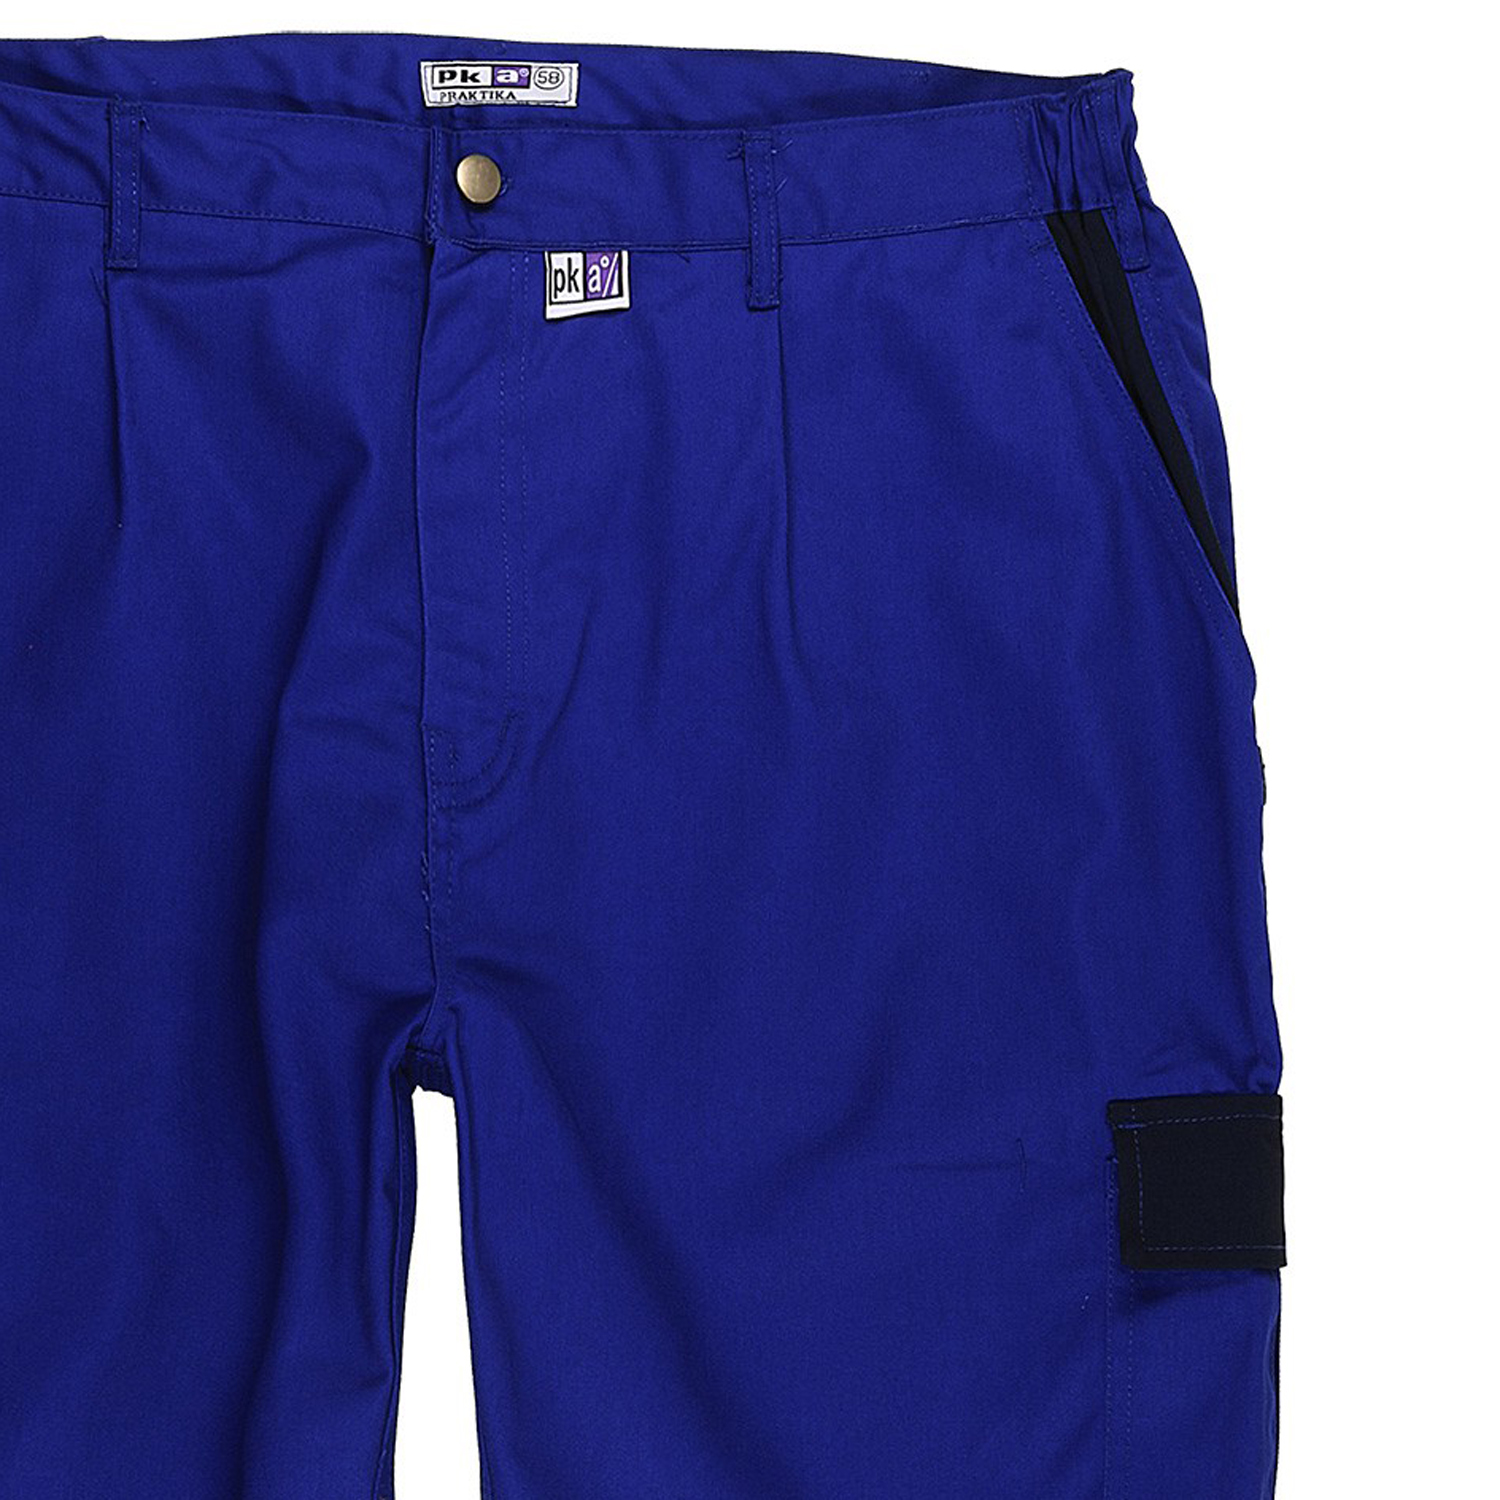 Workingclothes, Shorts blue by PKA Klöcker, large sizes up to 66